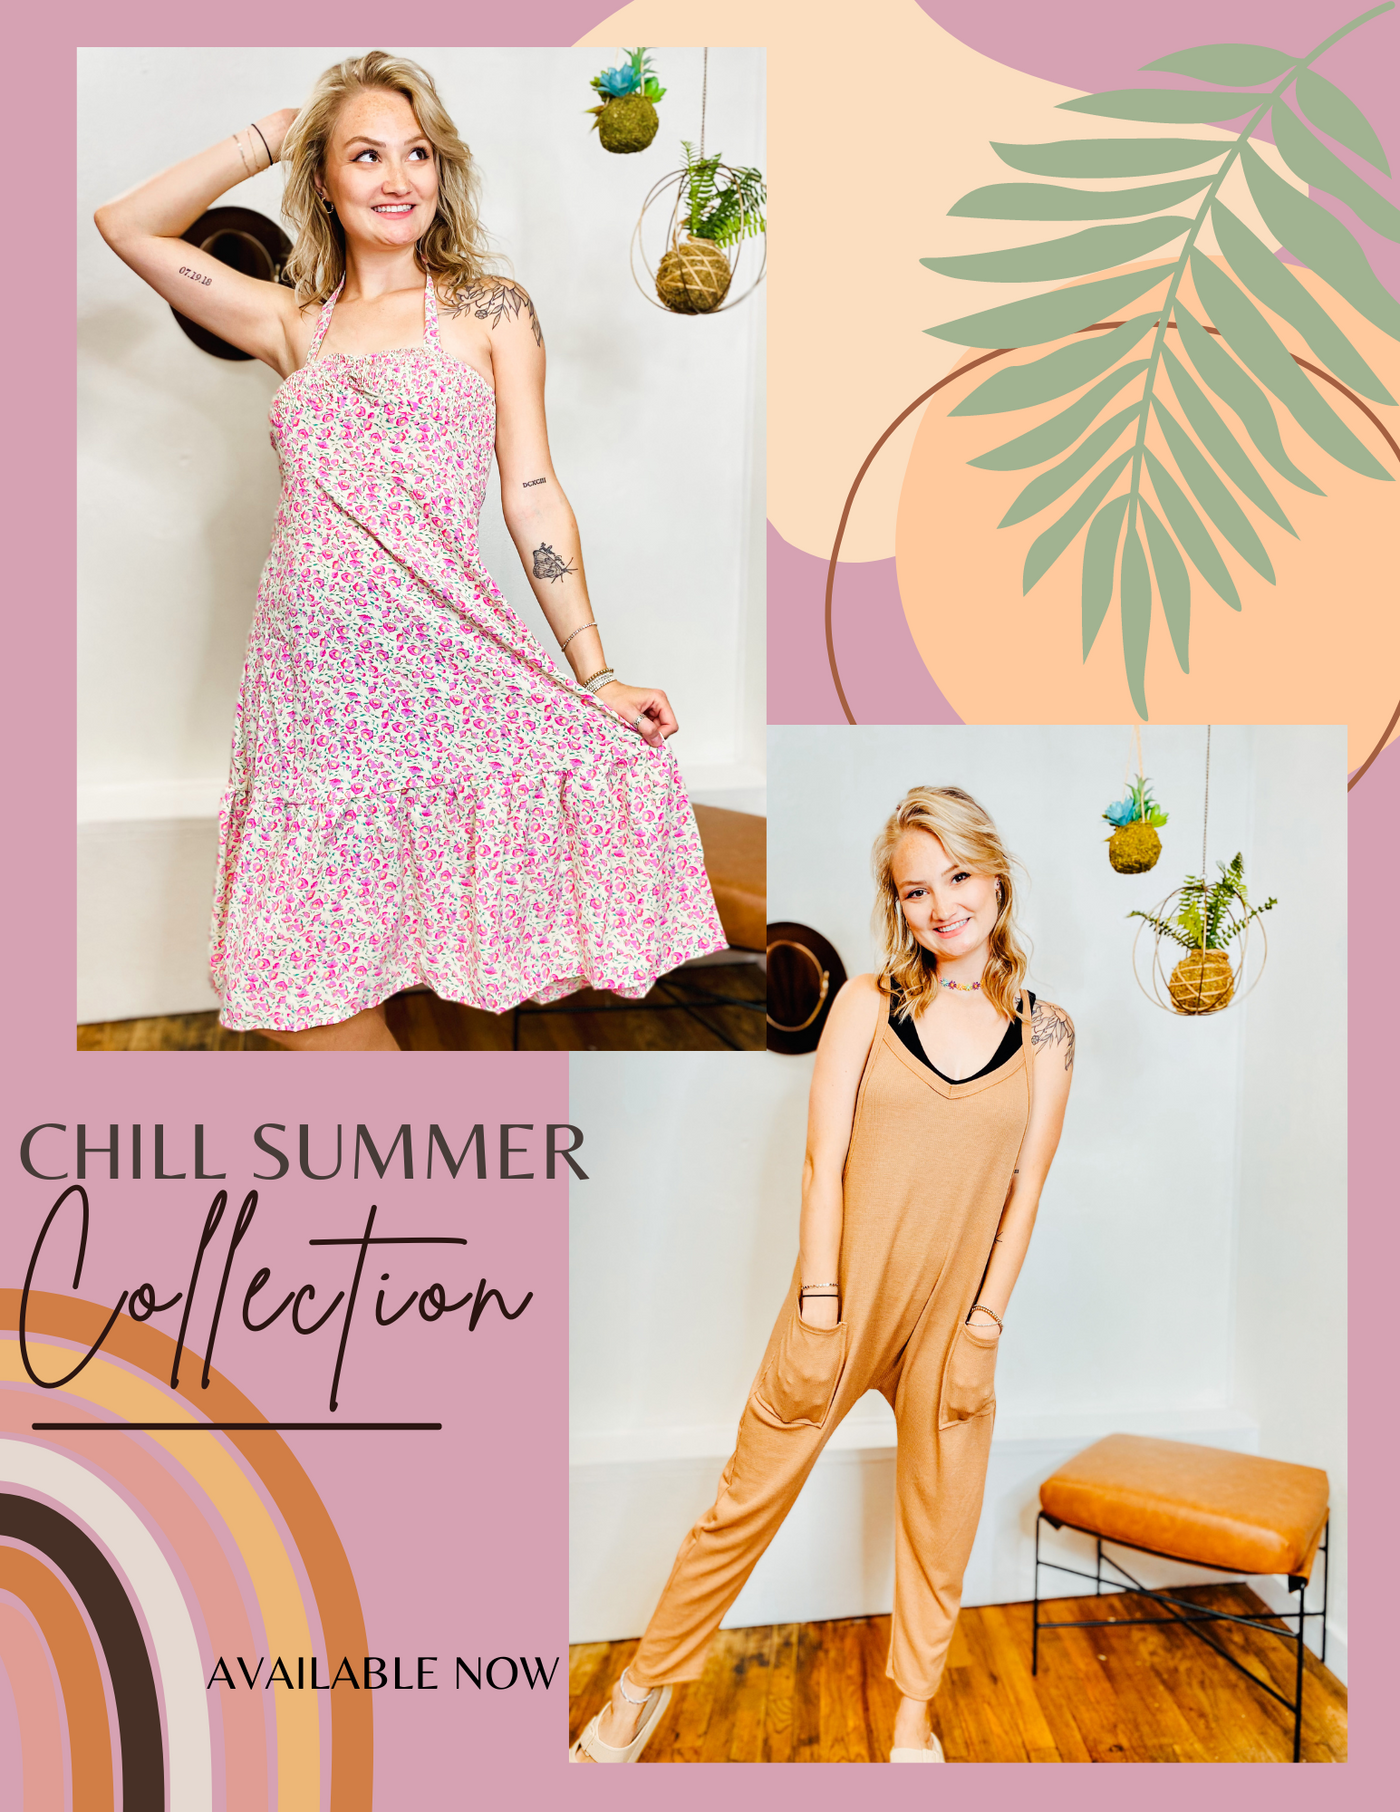 Feel the Summer Vibes in our Chill Summer Collection